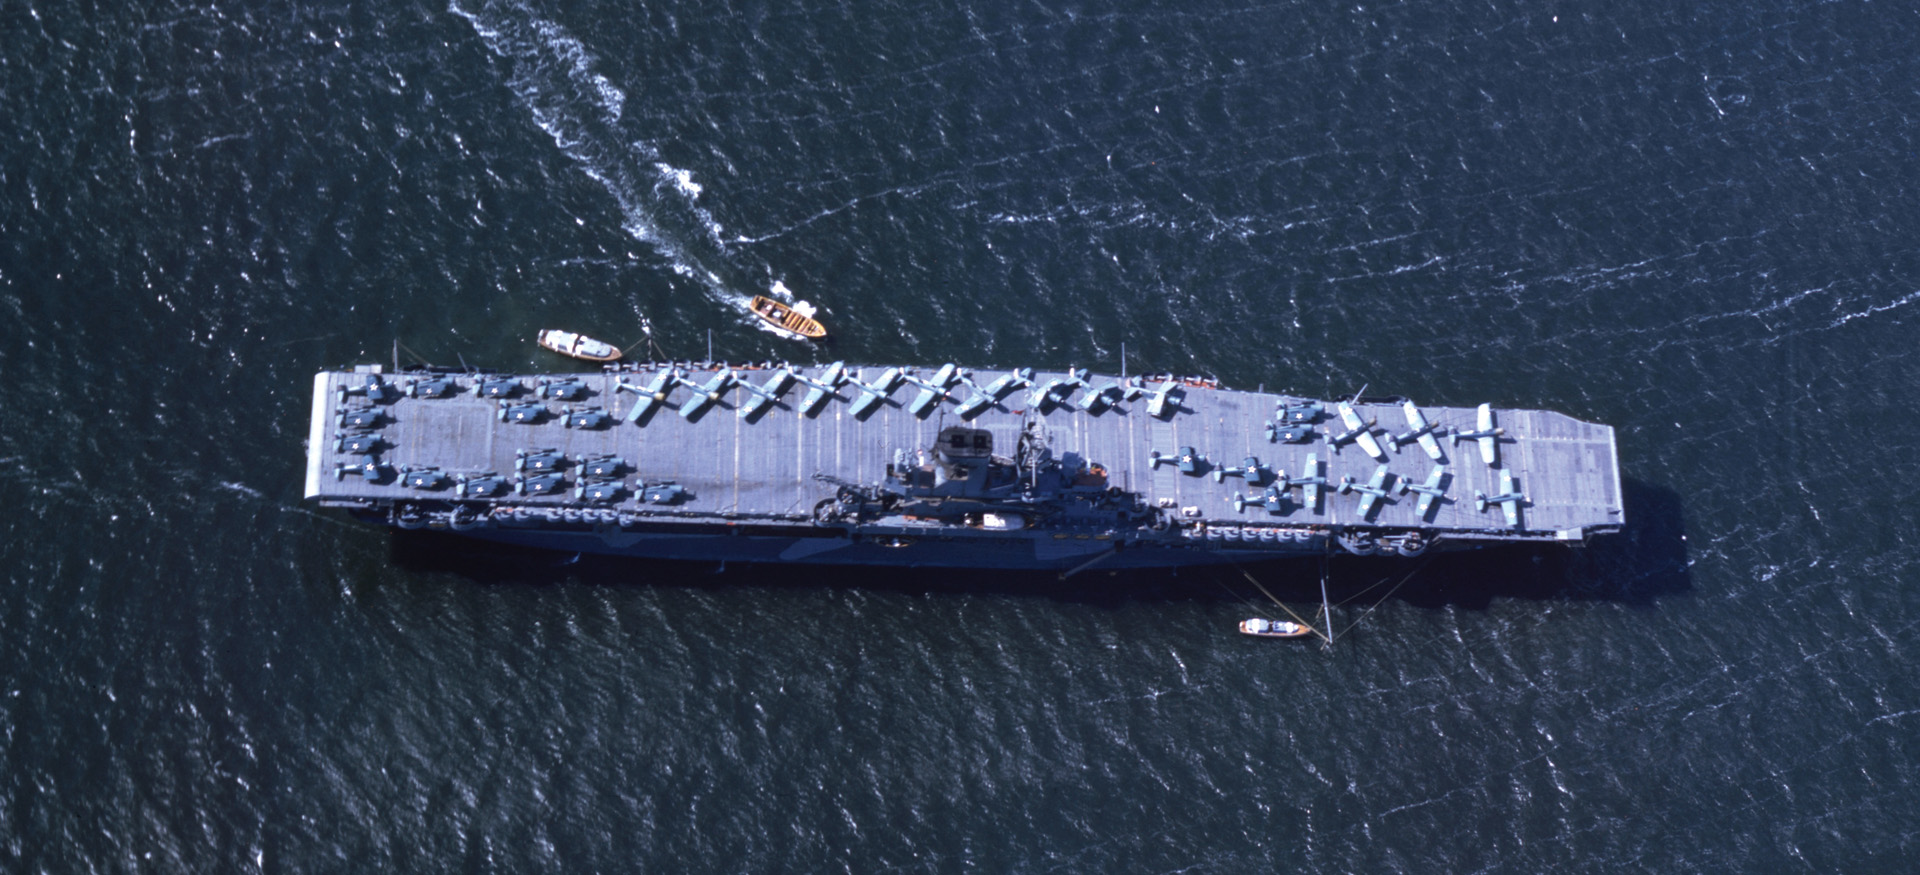 Aerial view of the USS Wasp (CV-7) near San Diego, California, in June 1942, shows 38 Hellcats and Dauntlesses, some with their wings folded, arrayed on the flight deck.